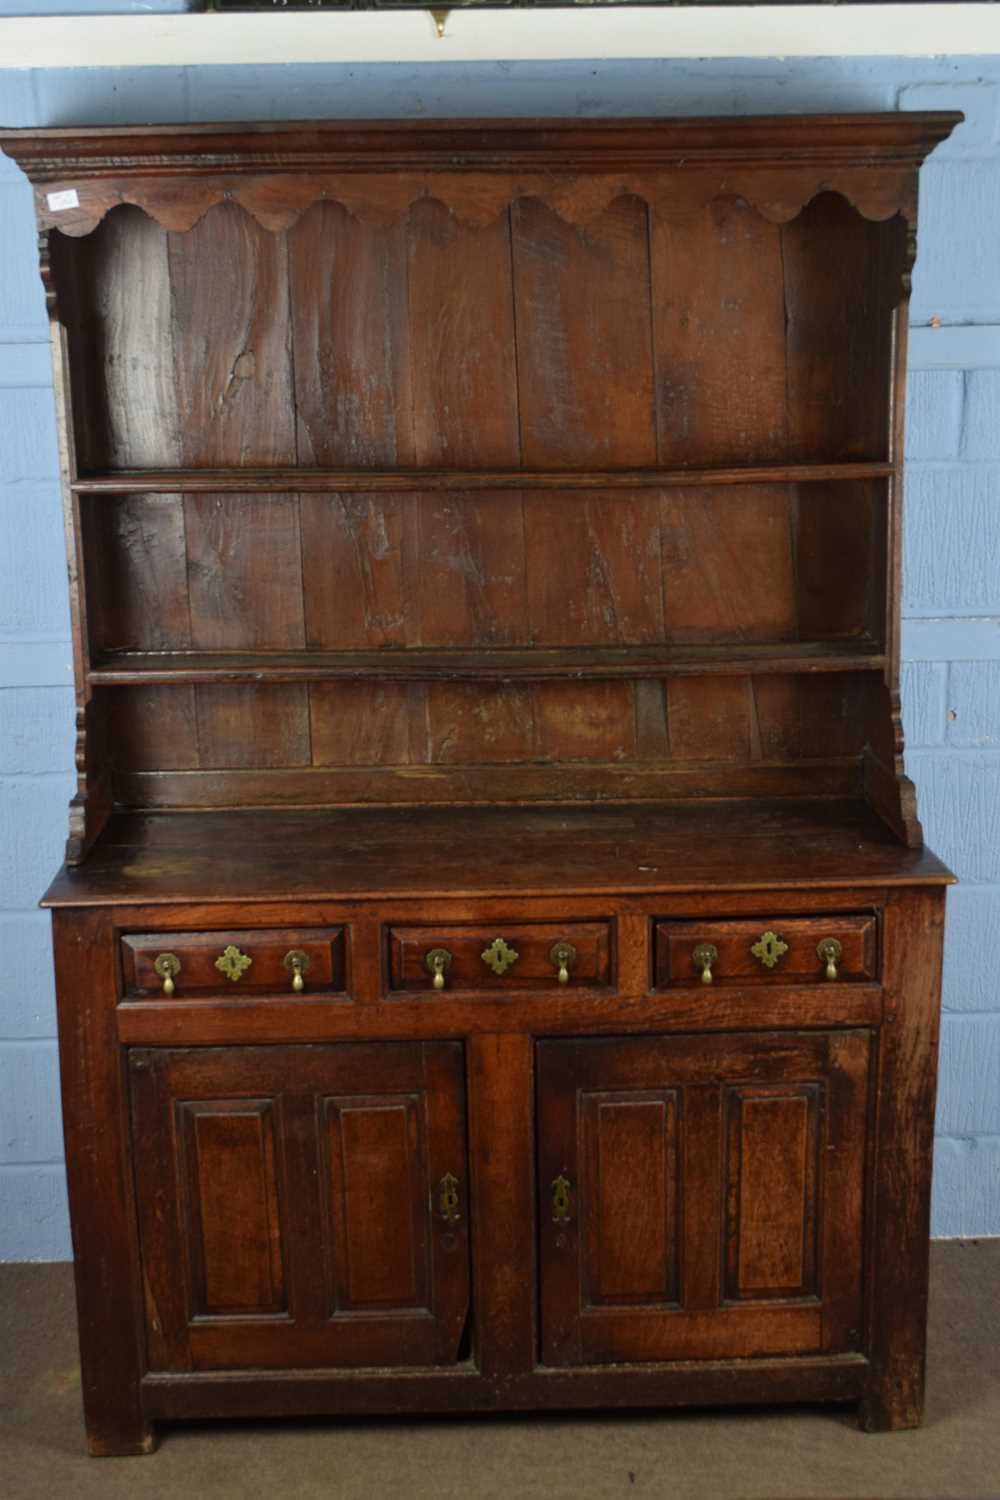 18th century oak dresser, the top section with moulded cornice and two shelves over a base with